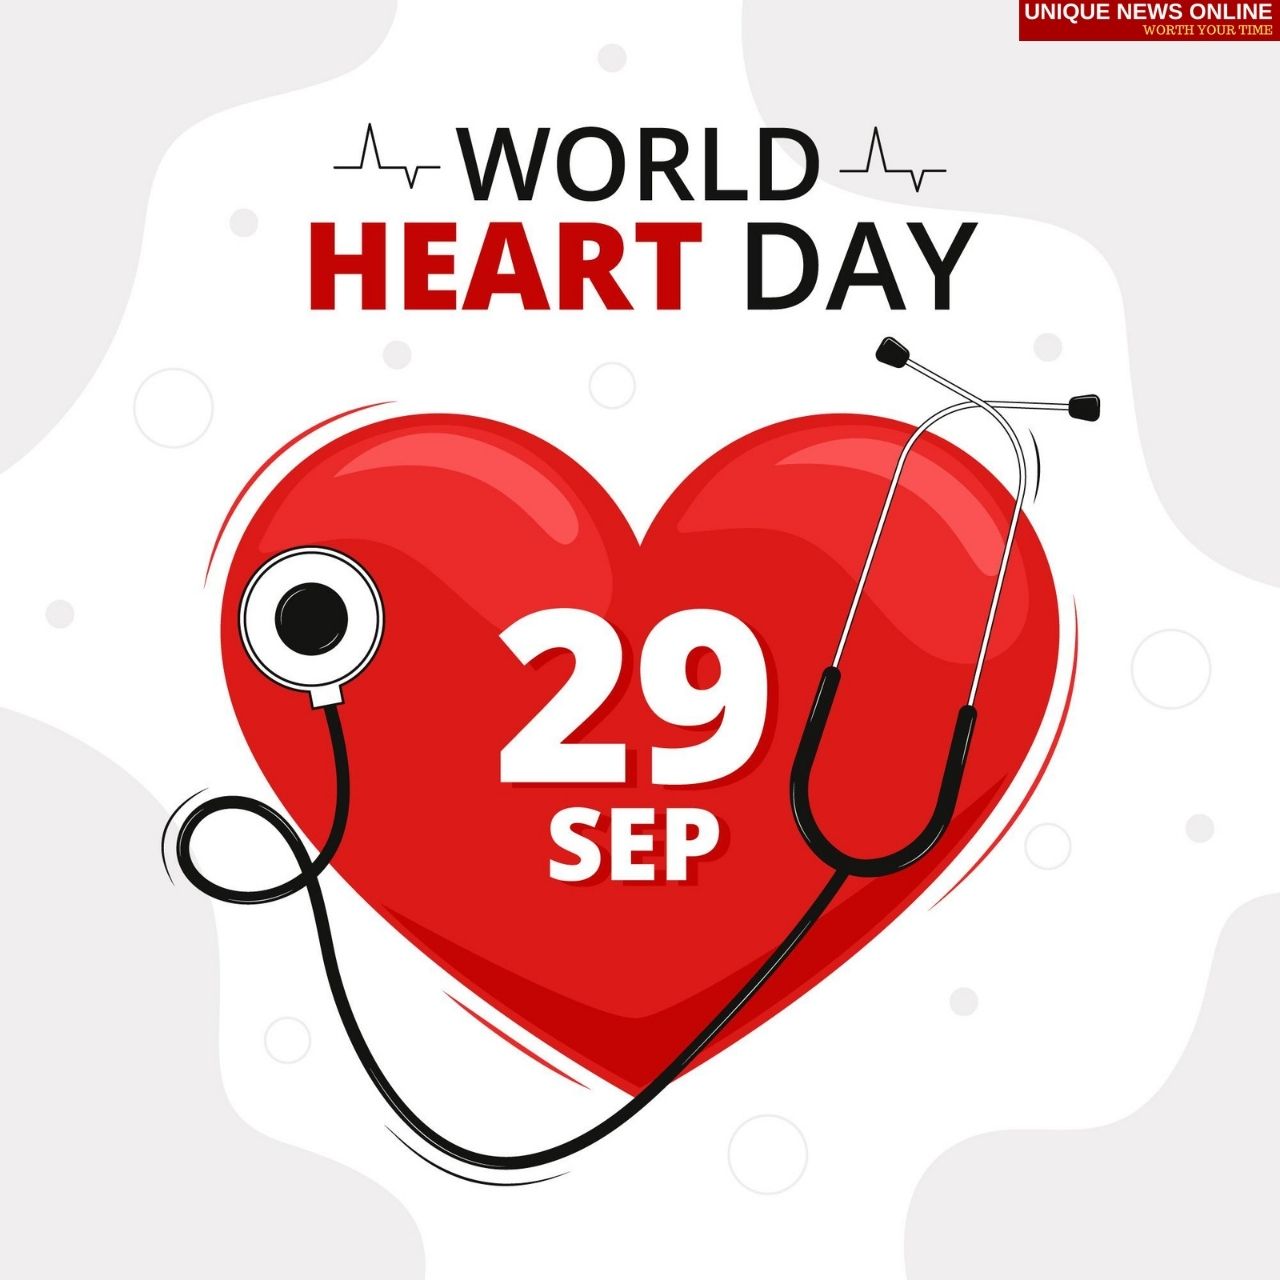 World Heart Day 2021 Quotes, Messages, Poster, WhatsApp Status, and Images to create awareness